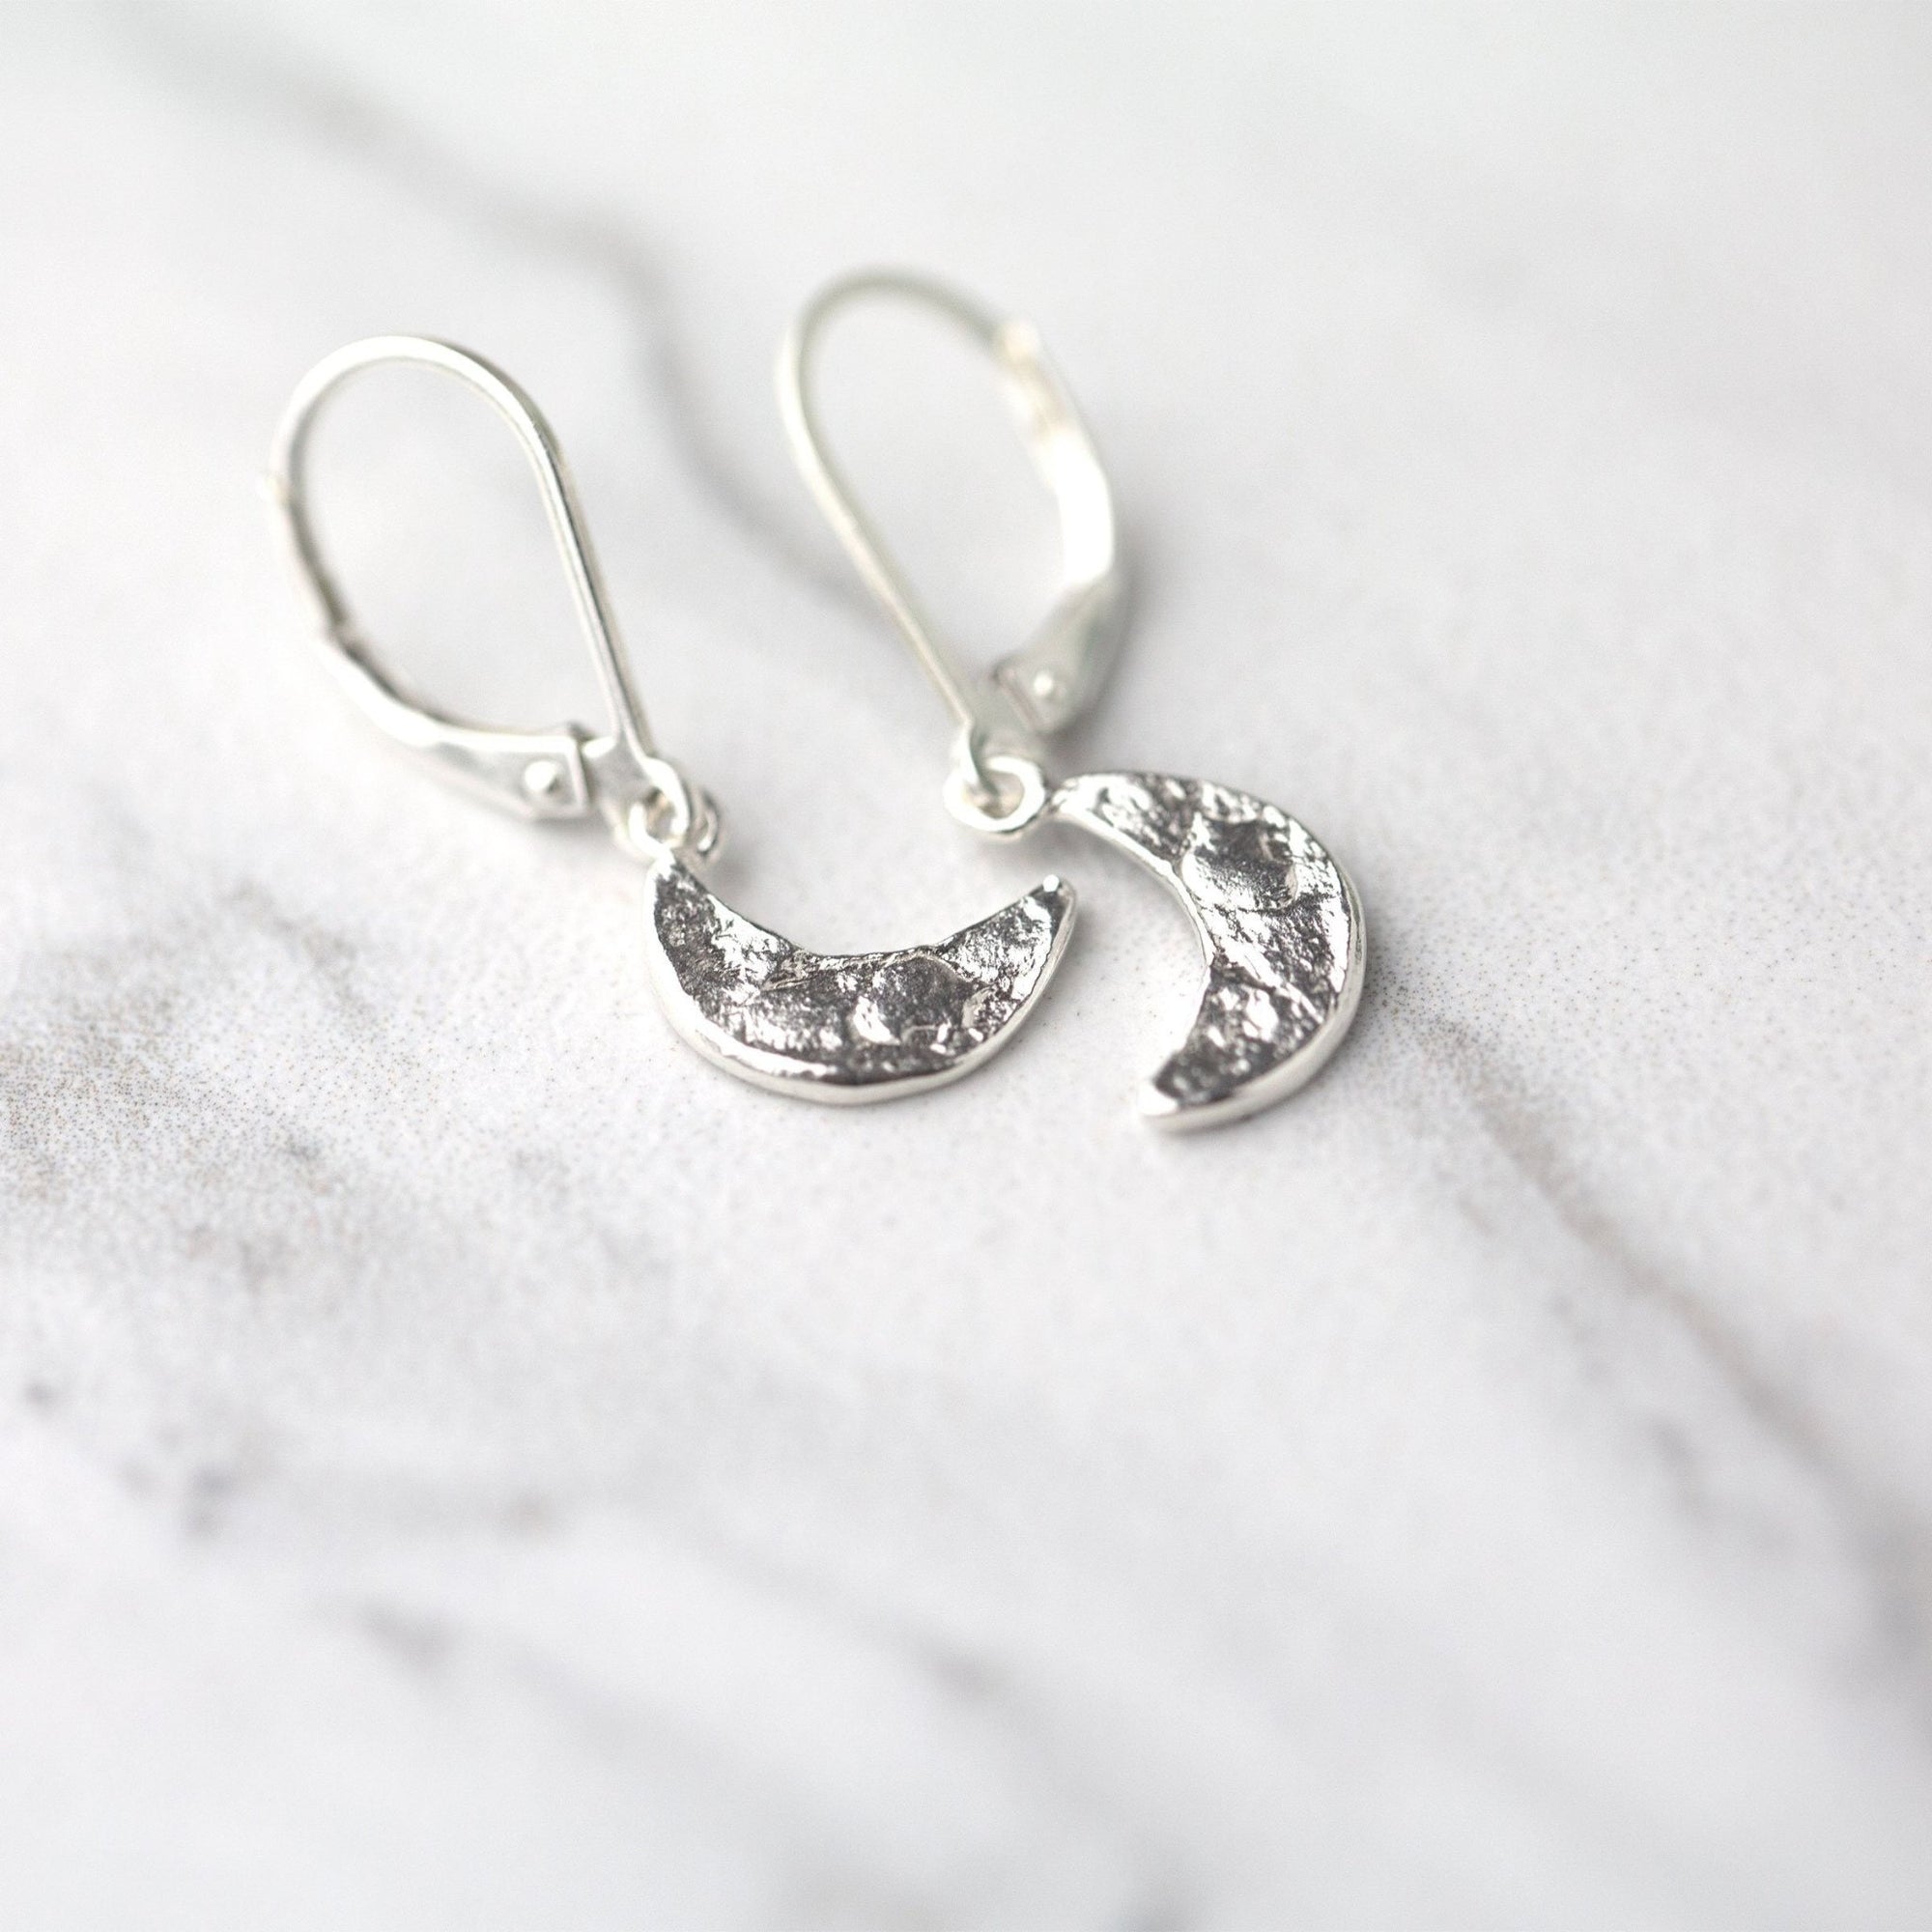 Crescent Moon Lever-back Earrings - Handmade Jewelry by Burnish